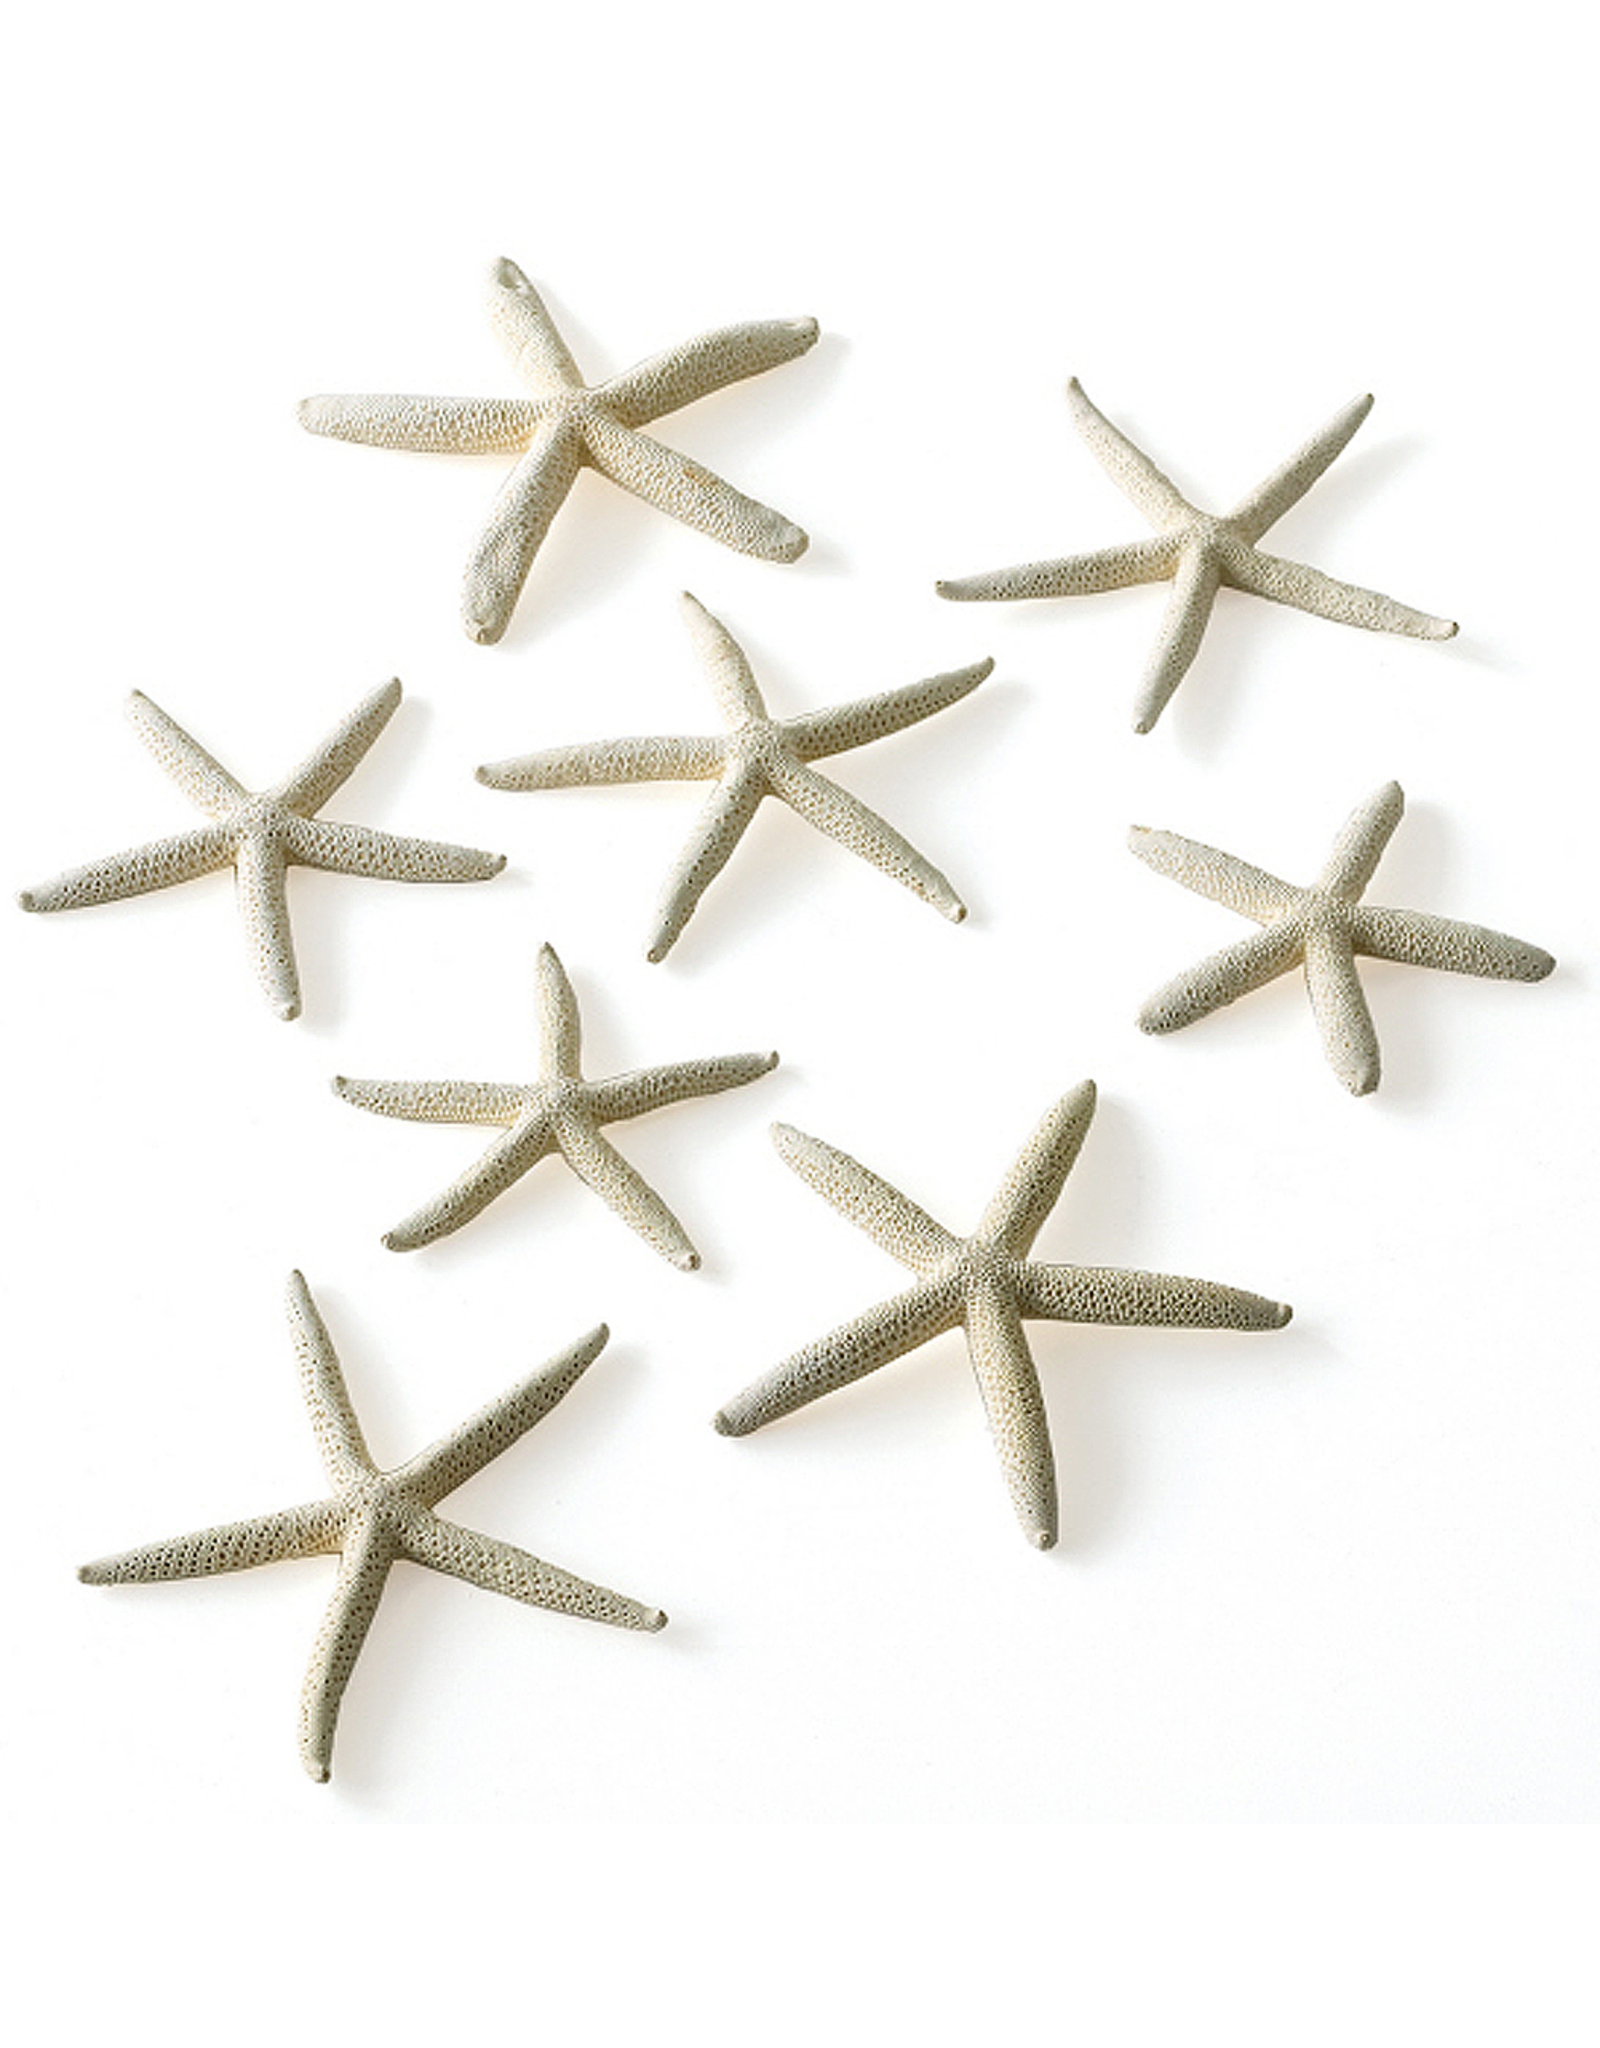 Twos Company White Finger Starfish Set of 10 in Gift Bag 3553 Twos Company